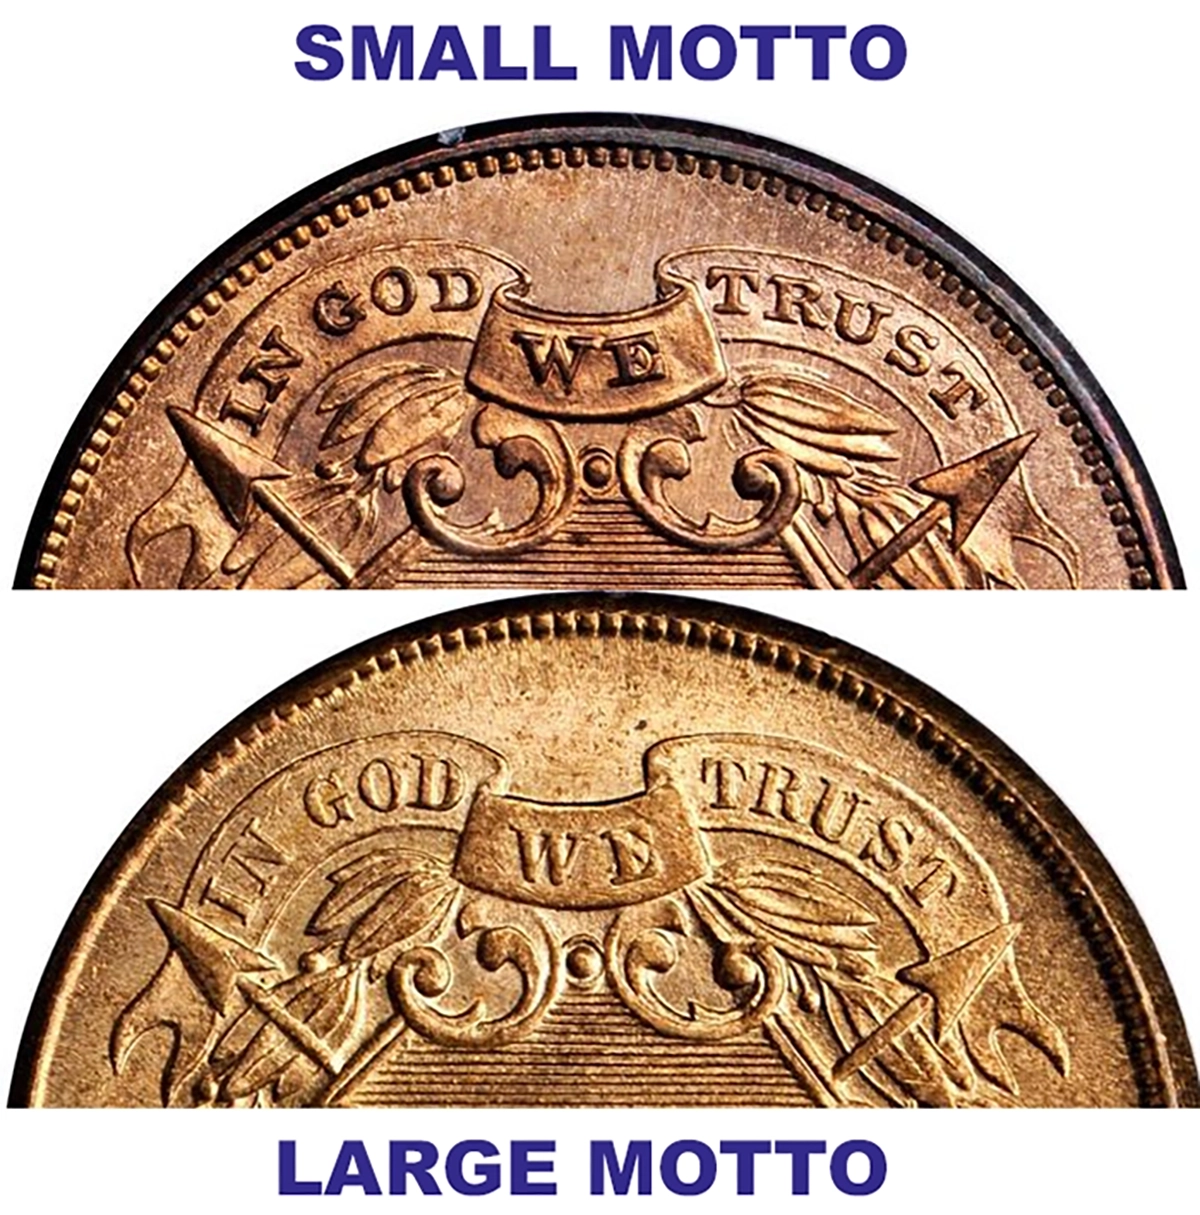 Small Motto and Large Motto 1864 Two-Cent Pieces. Image: Stack’s Bowers / CoinWeek.